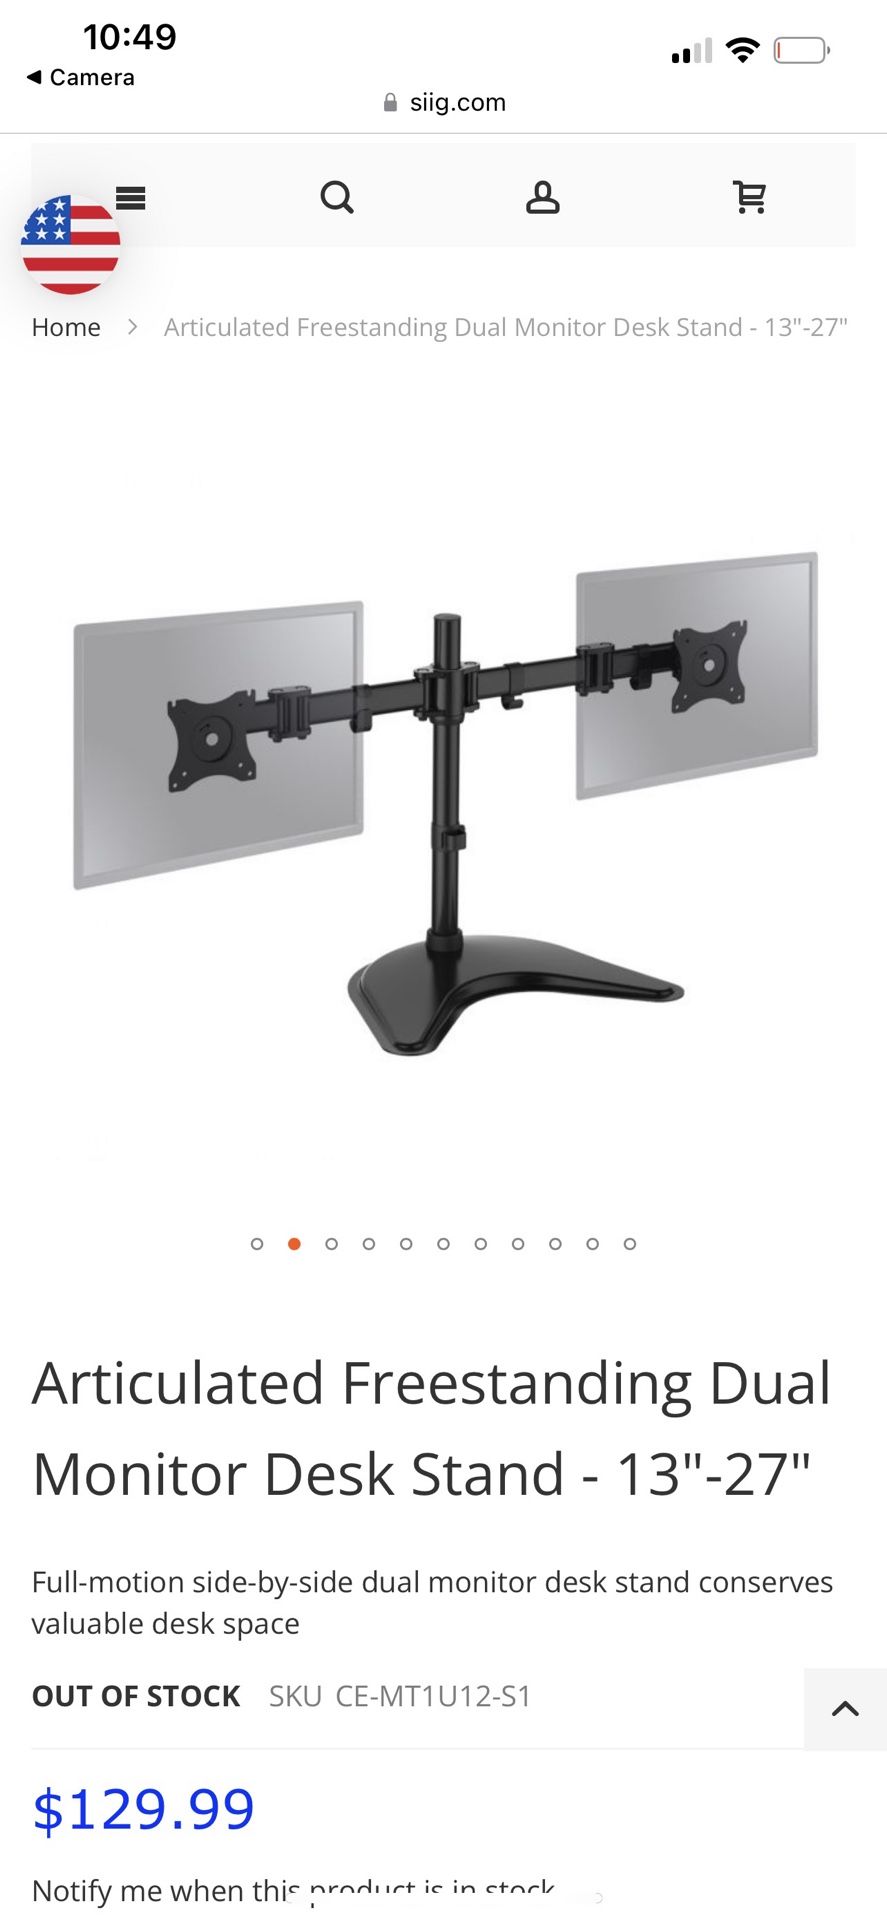 Articulated Freestanding Dual Monitor Desk Stand - 13"-27"